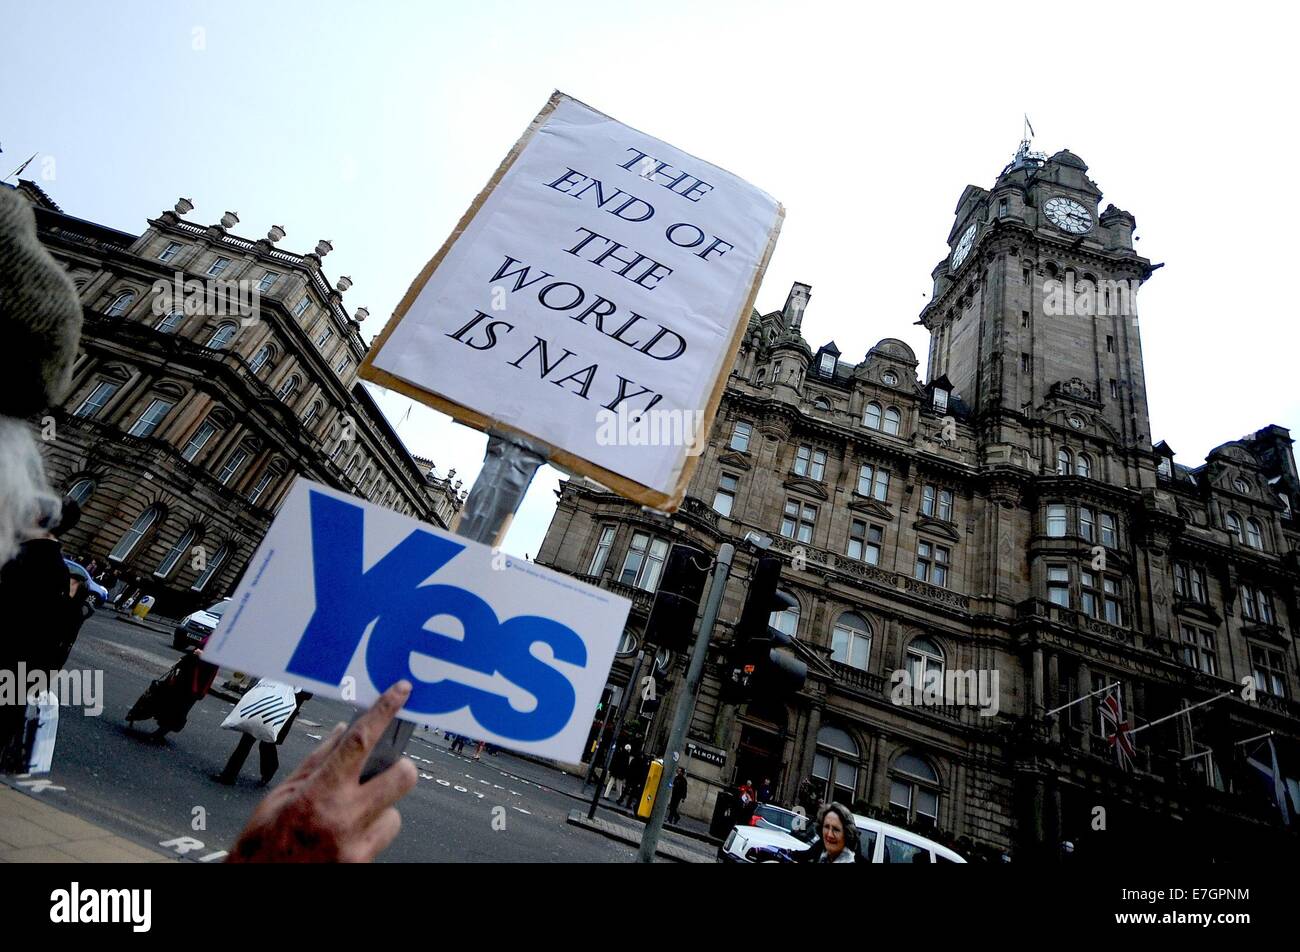 Edinburgh, United KIngdom. 17th Sep, 2014. Campaigners for the ''YES'' vote were out pushing their vote for the undecided vote around Edinburgh.The group say this is one last push to reach undecided voters for the Scottish referendum vote. Credit:  Gail Orenstein/ZUMA Wire/Alamy Live News Stock Photo